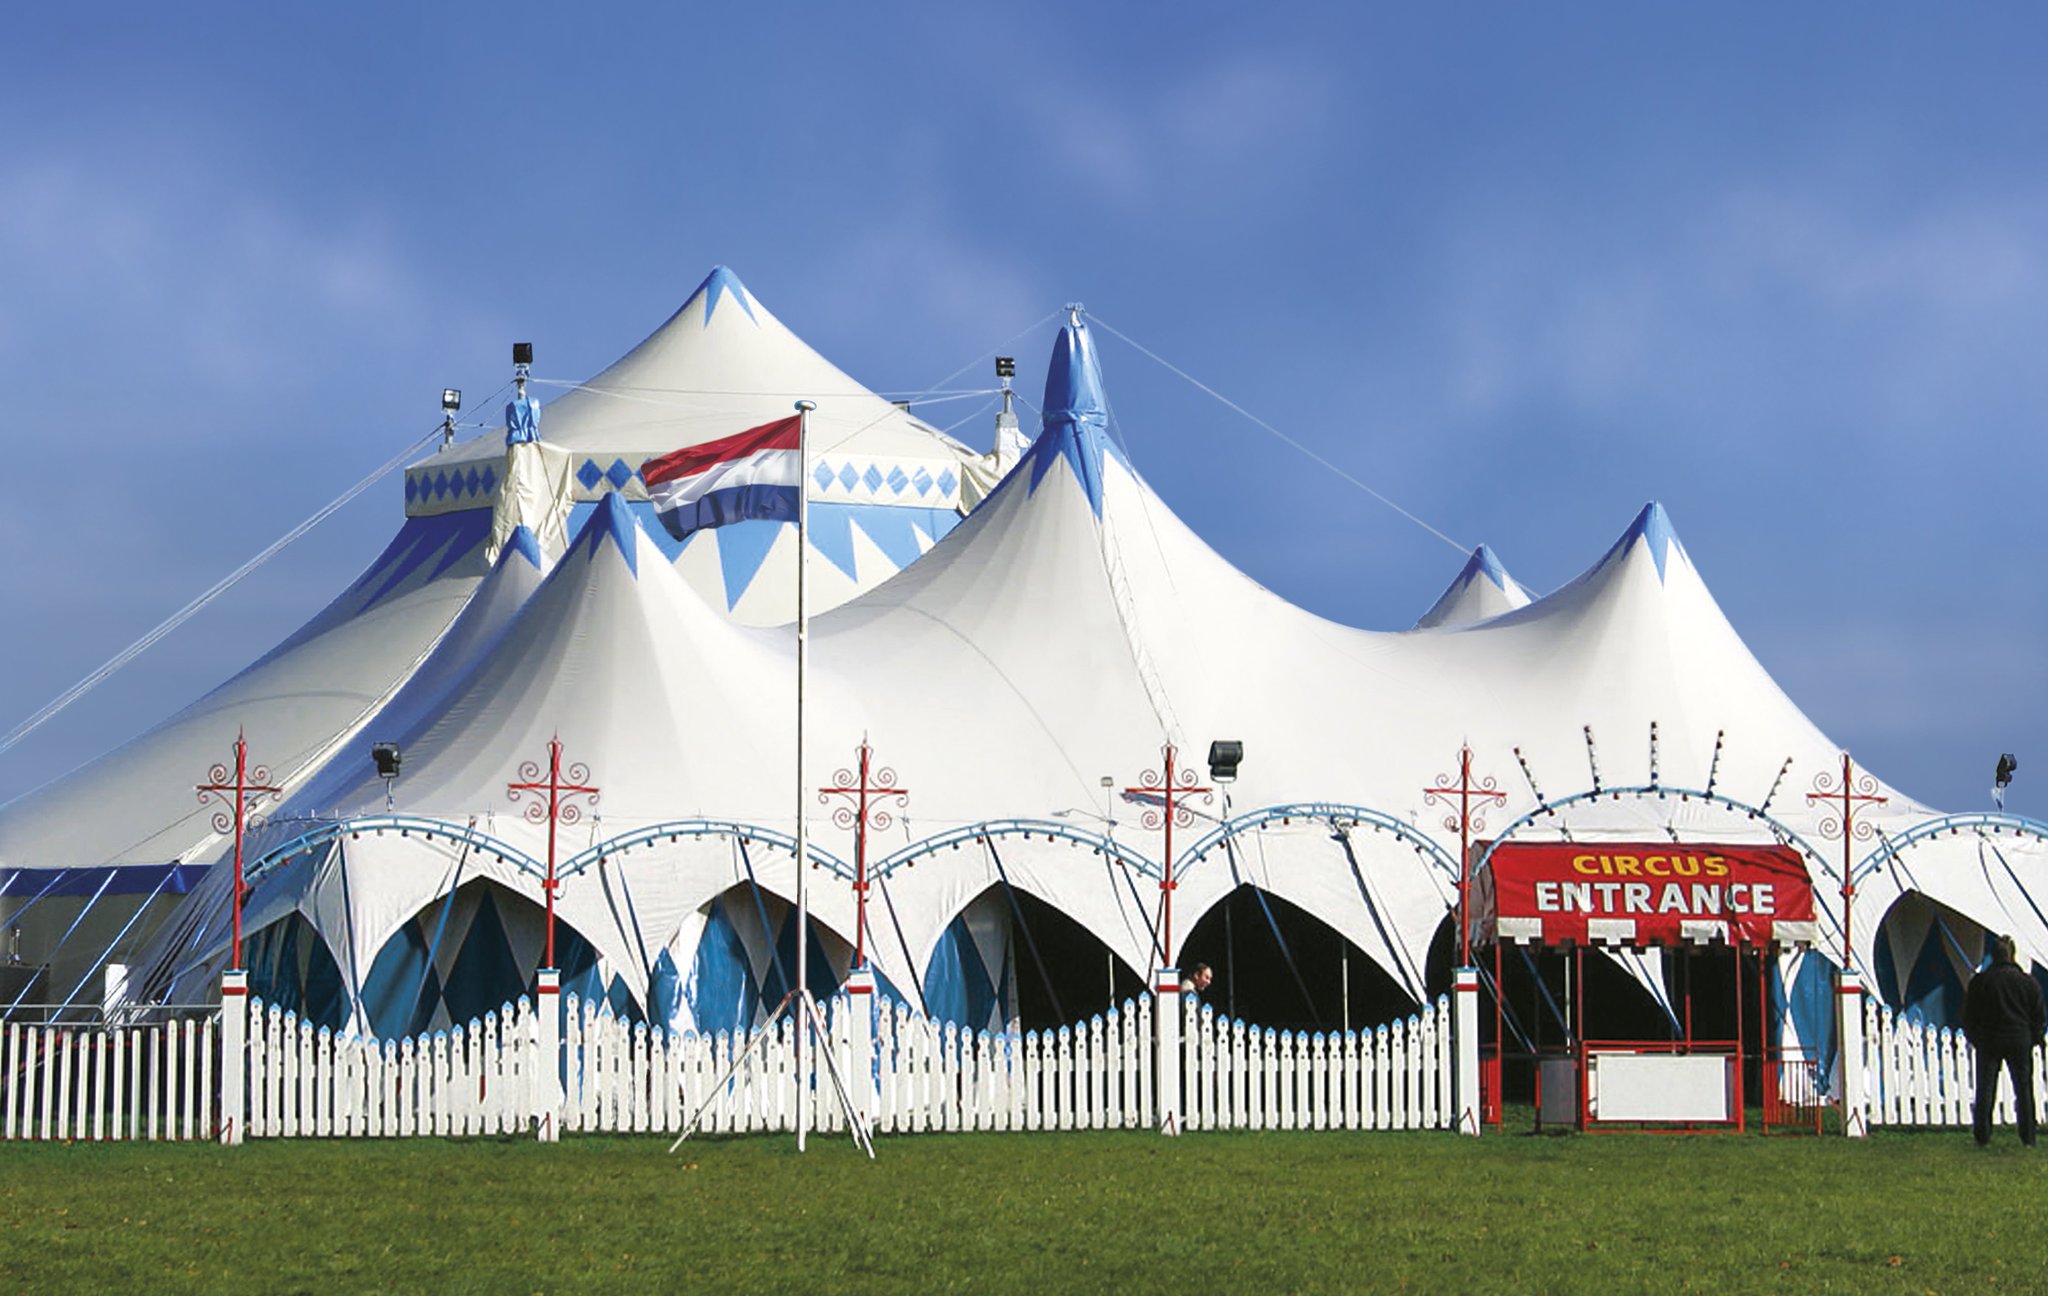 Netherlands Circus on Twitter: "A gorgeous shot of our HEATED Big - the place where dreams are made! For a full list of dates and to https://t.co/0W7cd6aAAv /